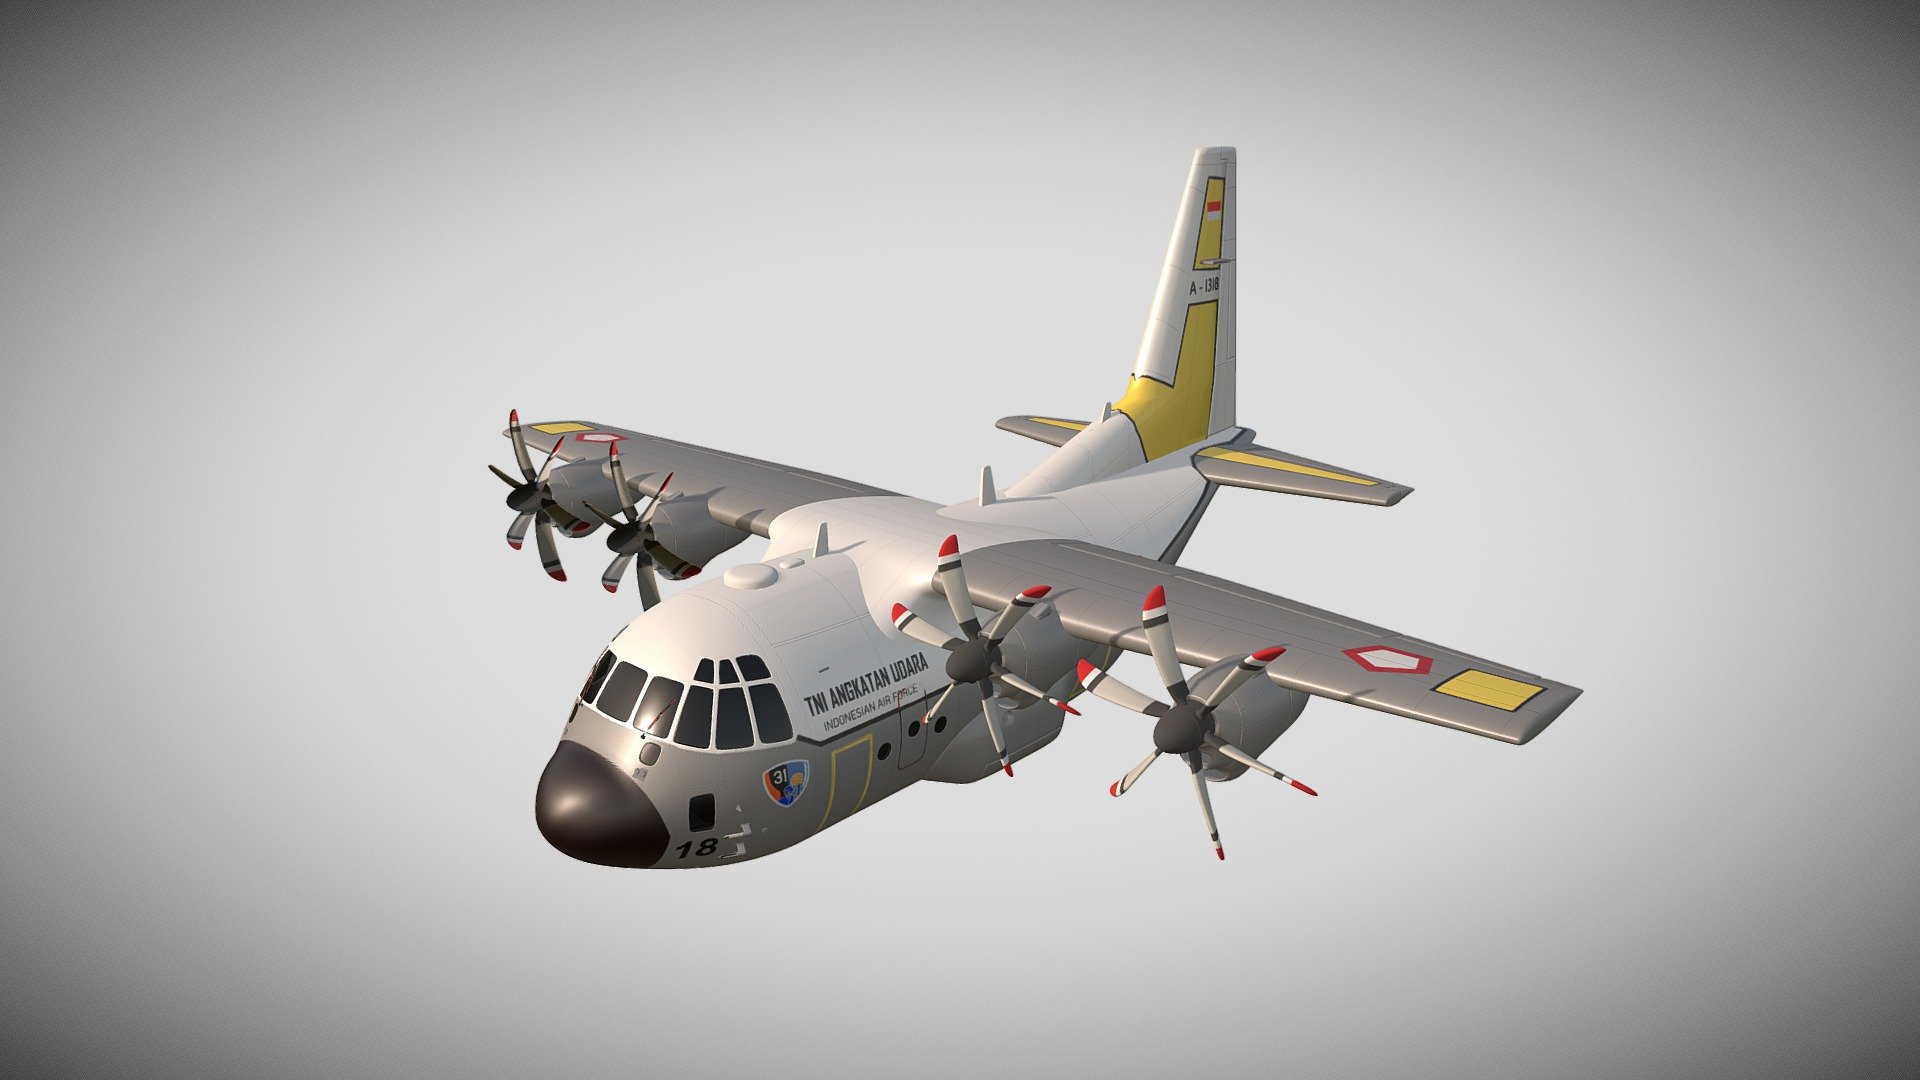 this is my learning model, based on the C-130j aircraft, I want to learn like a mini model or maybe you usually call it chubby style. I know it's not perfect, but I'll keep learning.
I have several models like this. maybe I'll upload it too 3d model